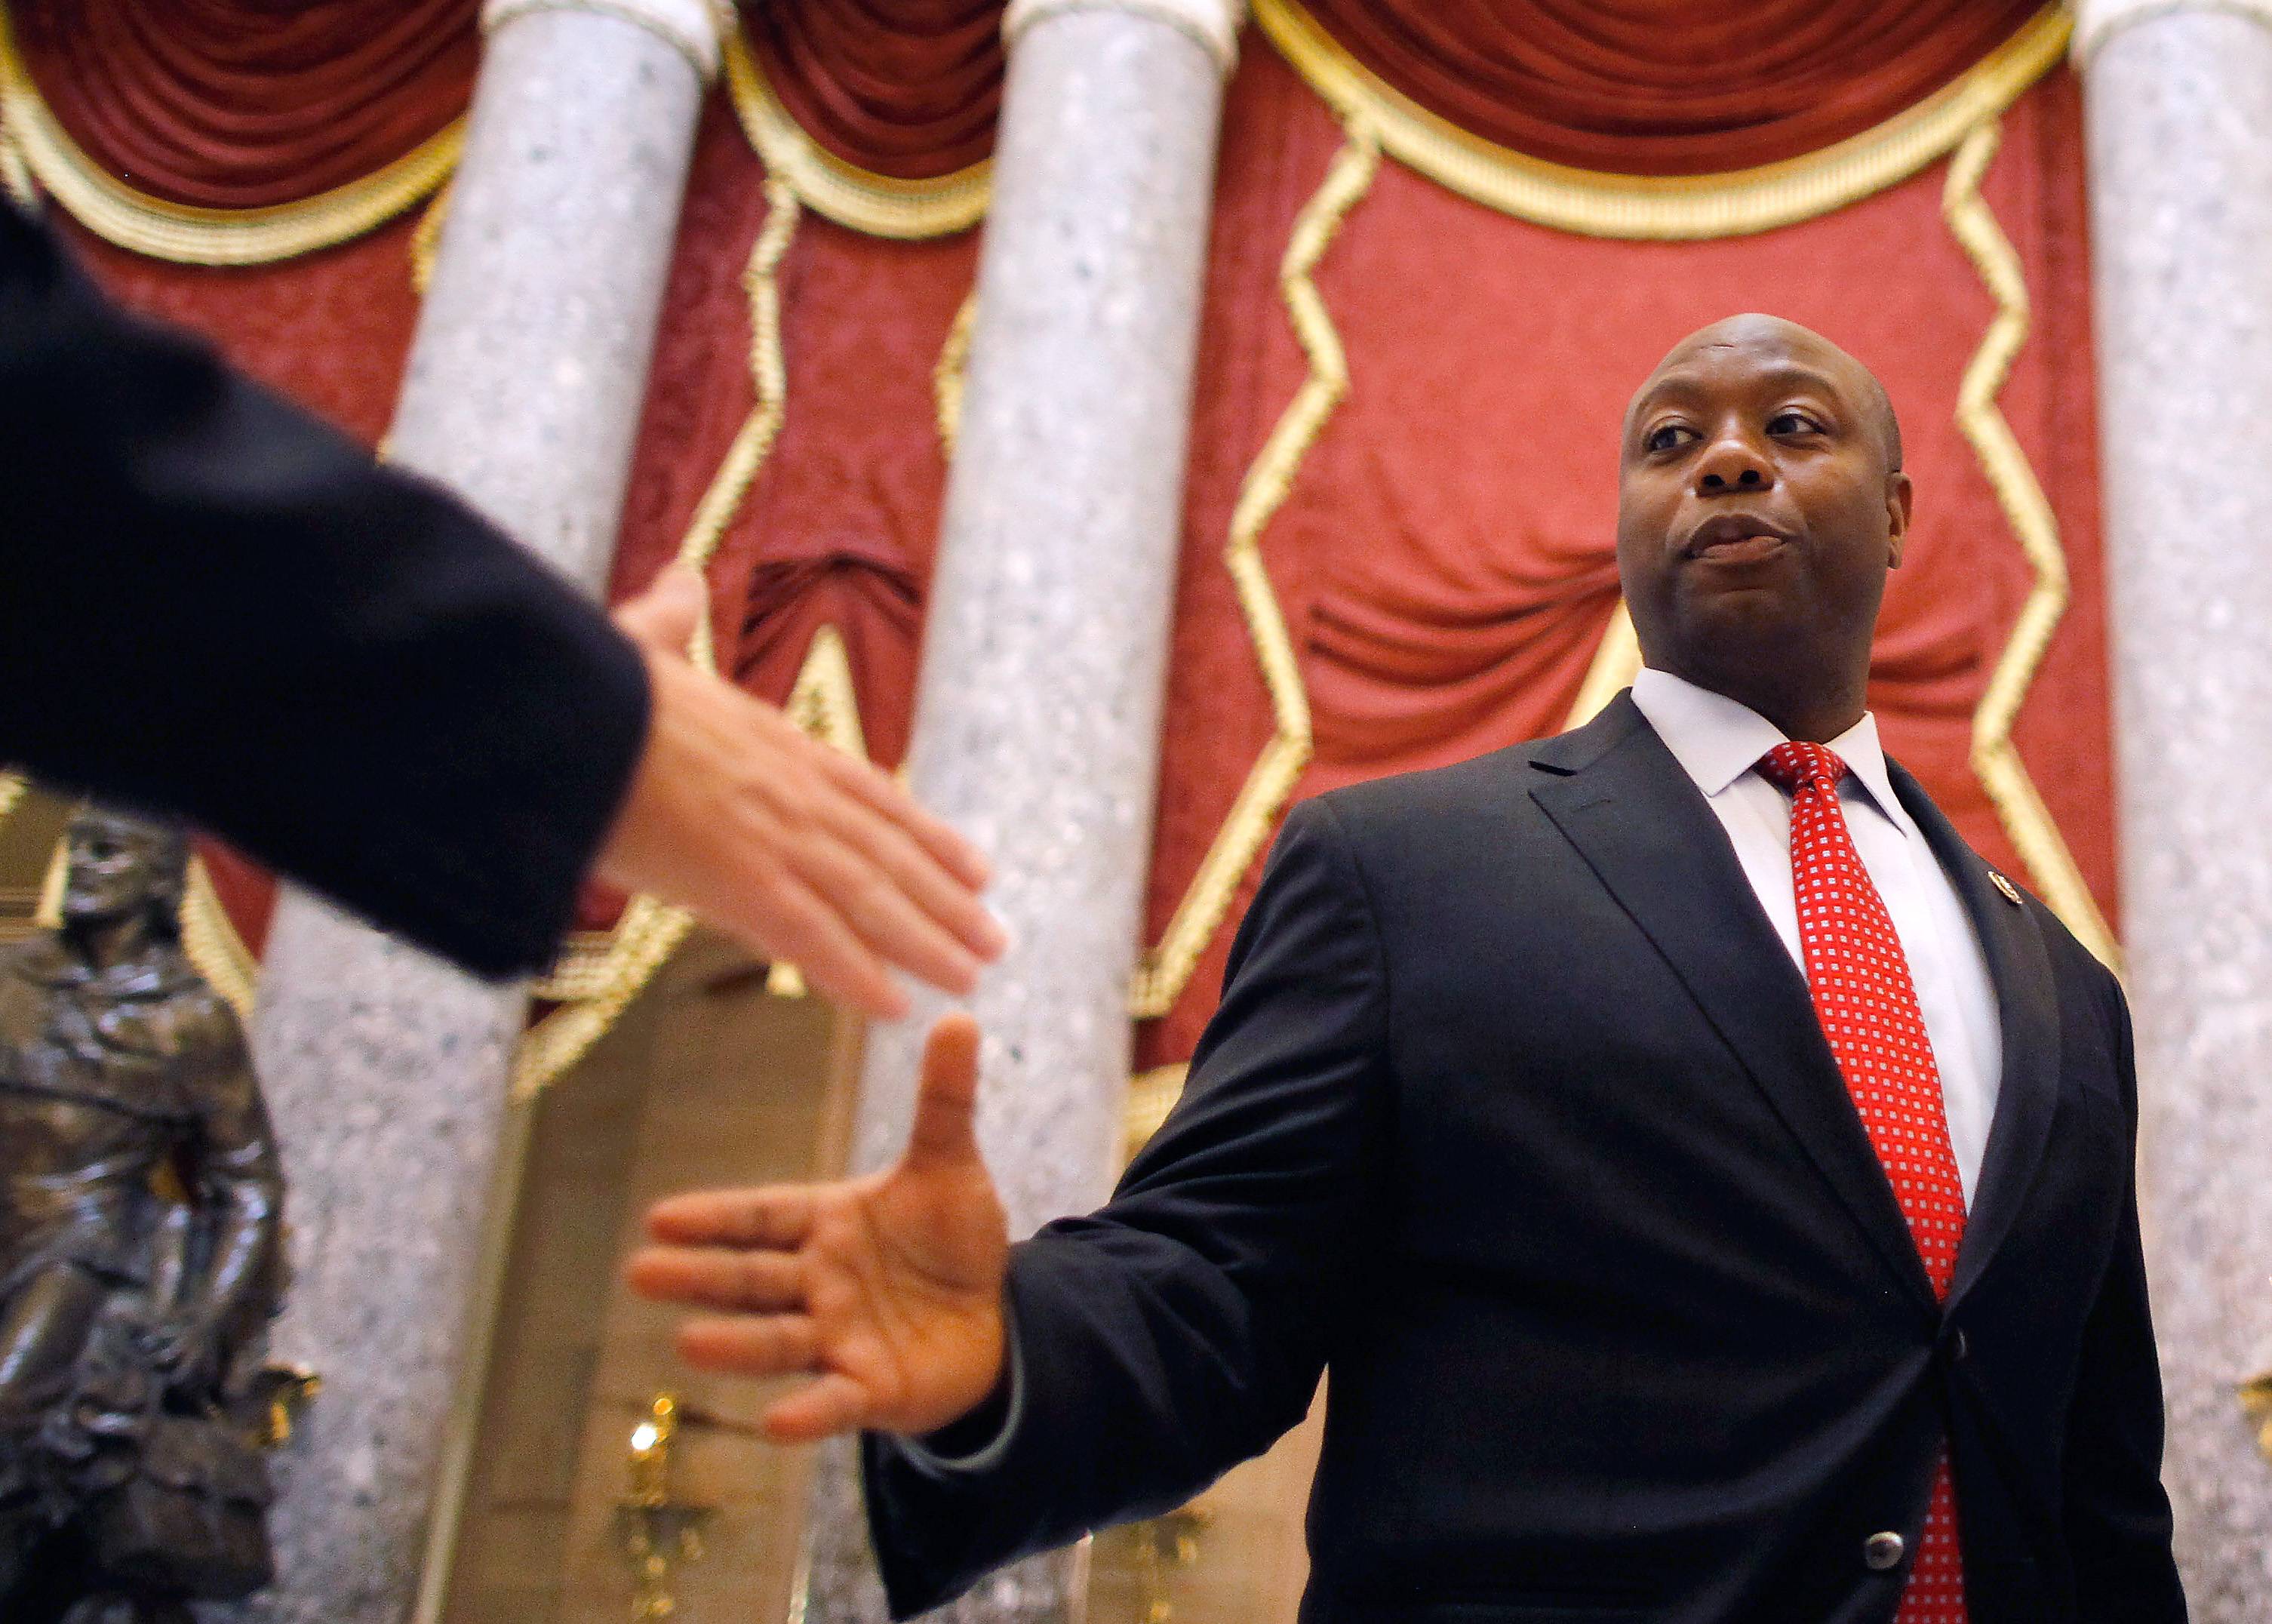 Tim Scott - &nbsp;Since he arrived in Congress in 2011, Rep. Tim Scott has quietly evolved into a leader who is trusted by both his freshman class and the House’s top Republicans. He’s also got the ear of all his party’s presidential contenders, each of whom he hosted at forums with voters in his home state of South Carolina.(Photo: Chip Somodevilla/Getty Images)